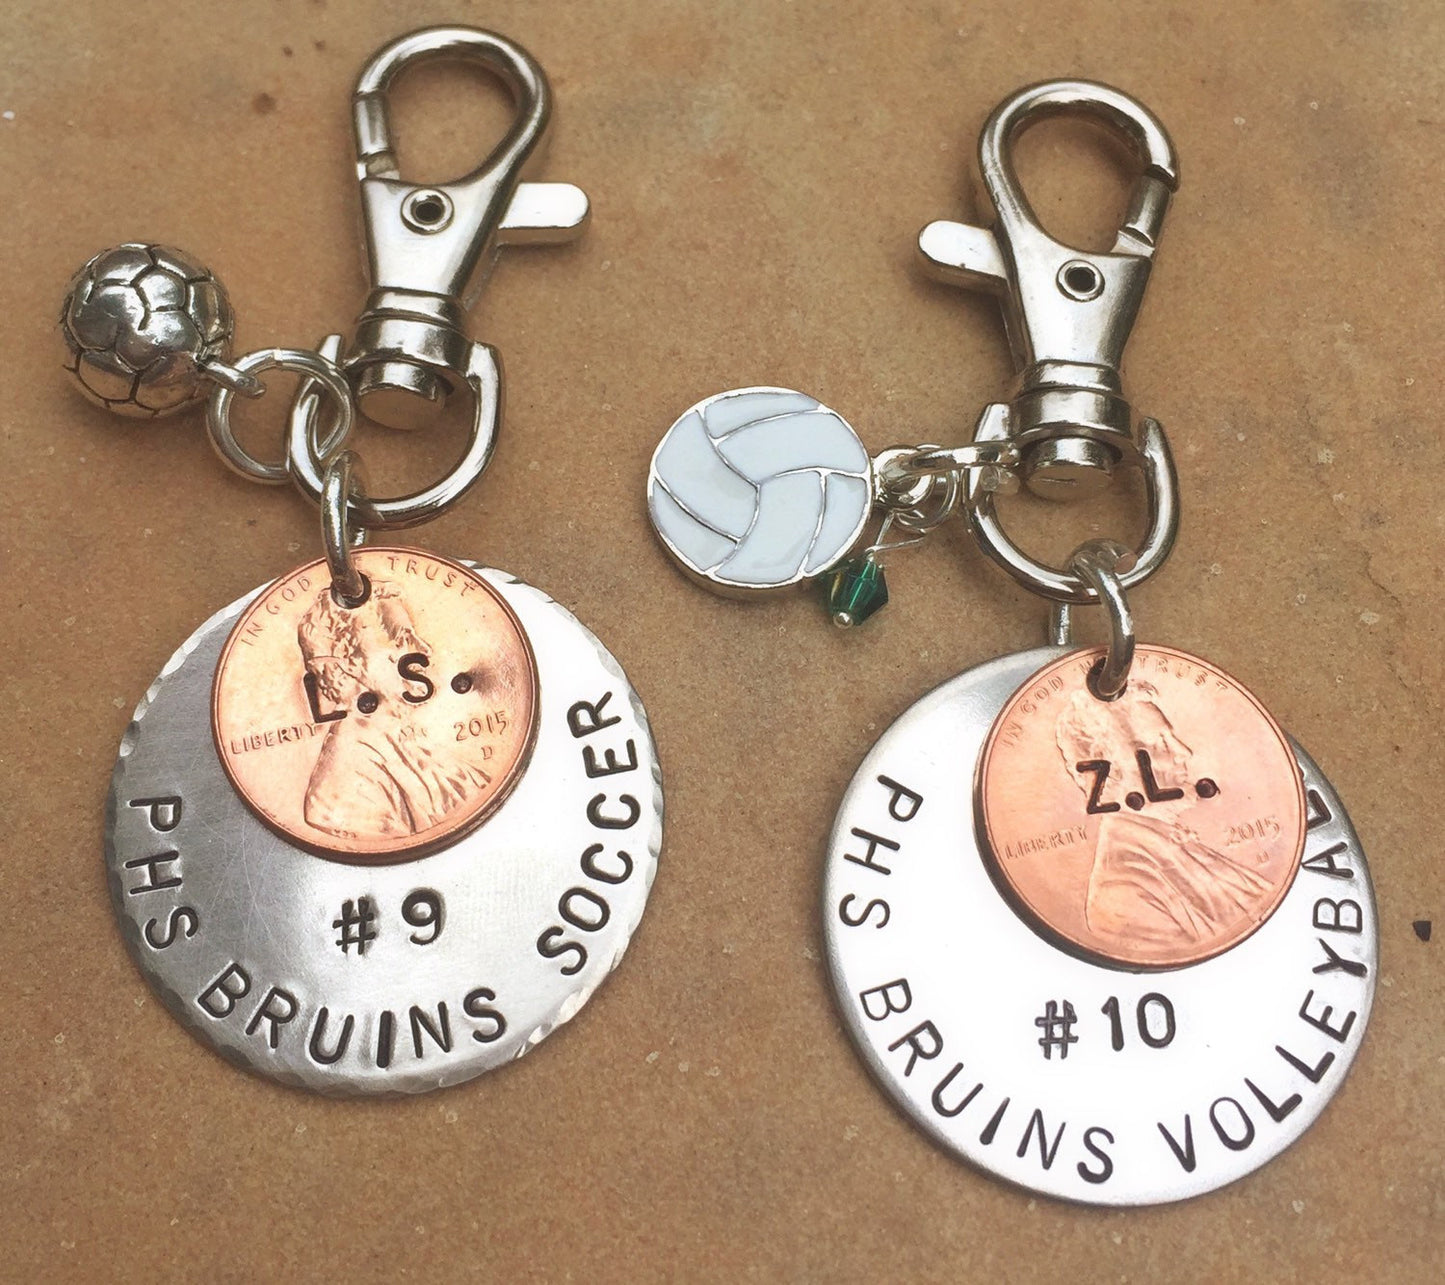 Mountain Bike Gift, Cycling Gift, Soccer Gift, Christmas Gift, High School Sports Keychain, Volleyball Keychain, Personalized Team Sports - Natashaaloha, jewelry, bracelets, necklace, keychains, fishing lures, gifts for men, charms, personalized, 